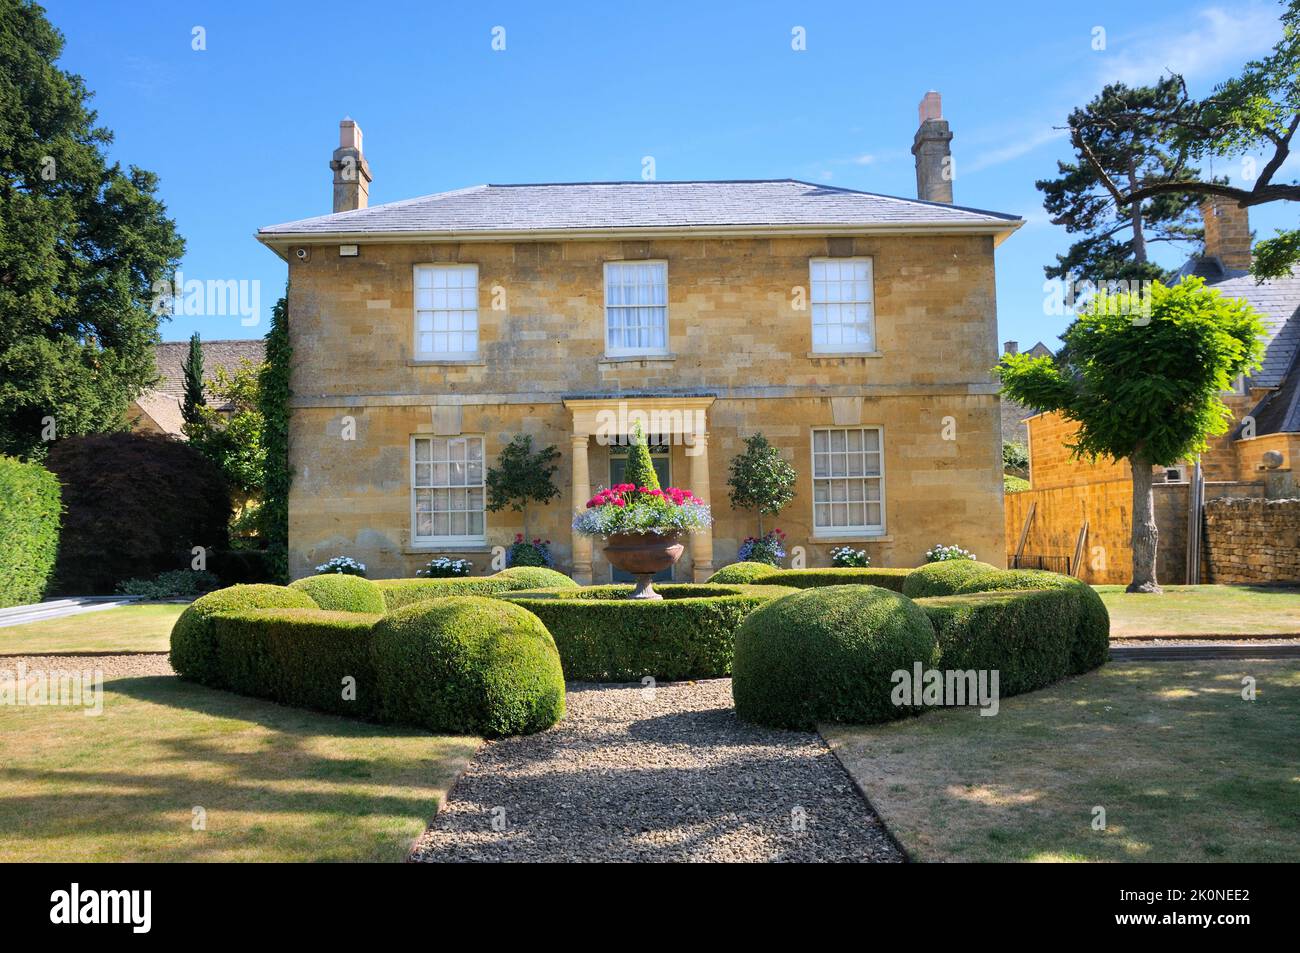 Croft Villa, a late Georgian house in Cotswold limestone with a symmetrical formal front garden and box hedge, Broadway, Cotswolds, Worcestershire, UK Stock Photo